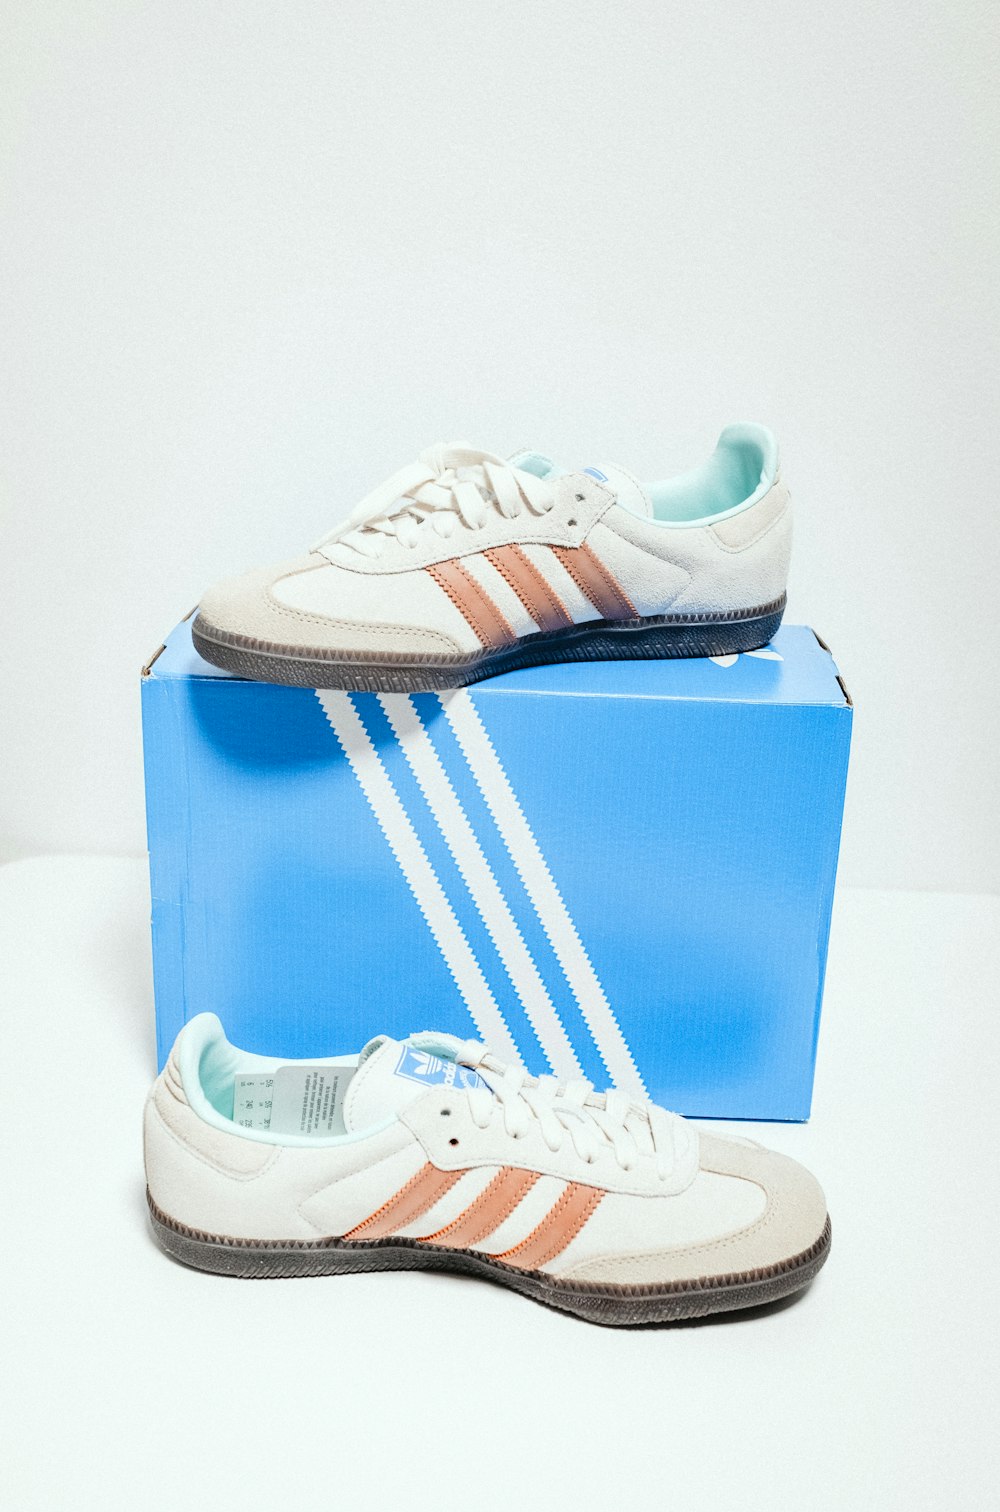 a pair of white and orange shoes sitting on top of a blue box